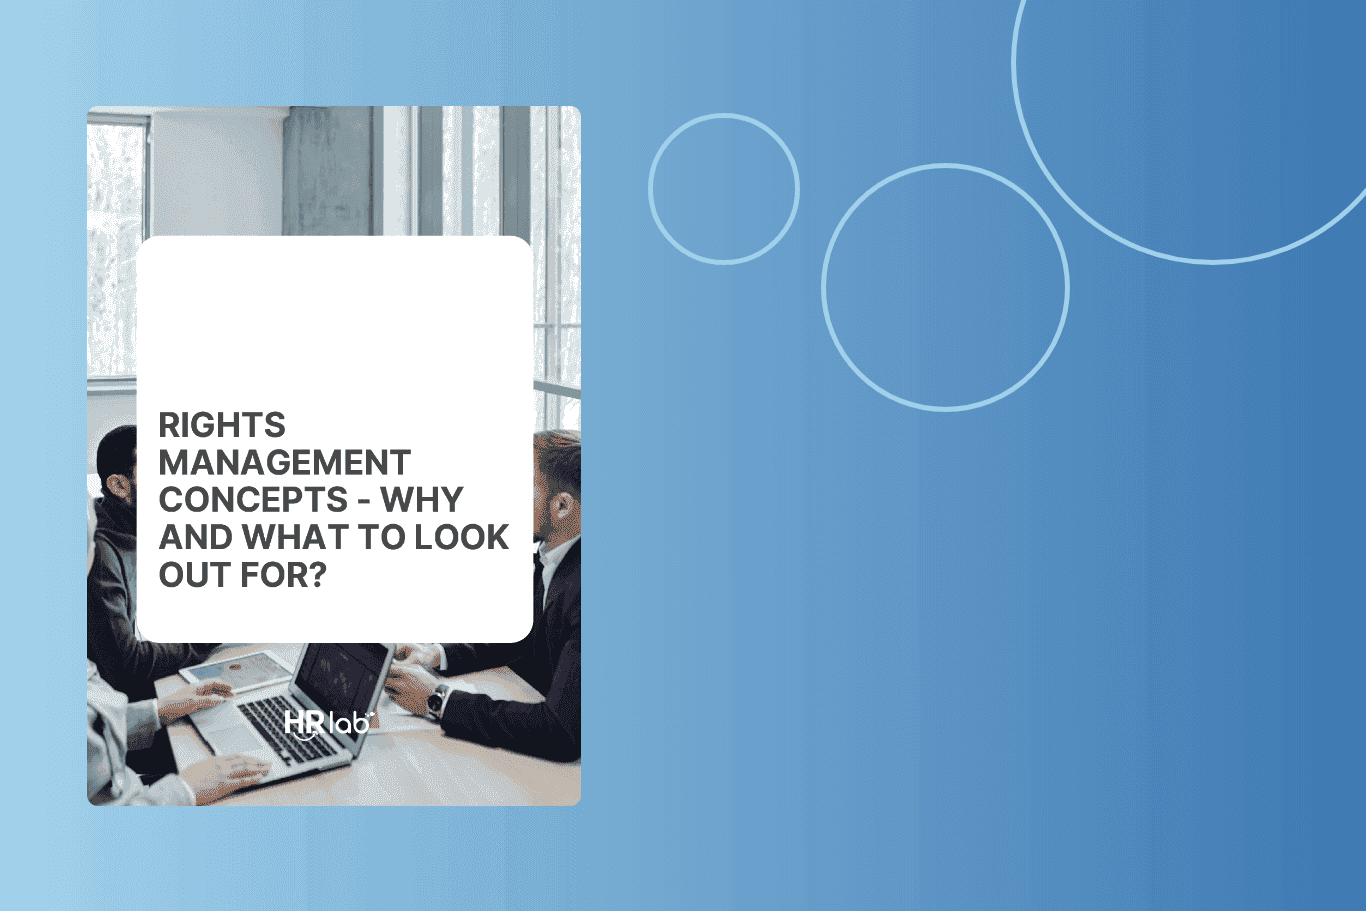 Rights Management - Why and What To Look Out For